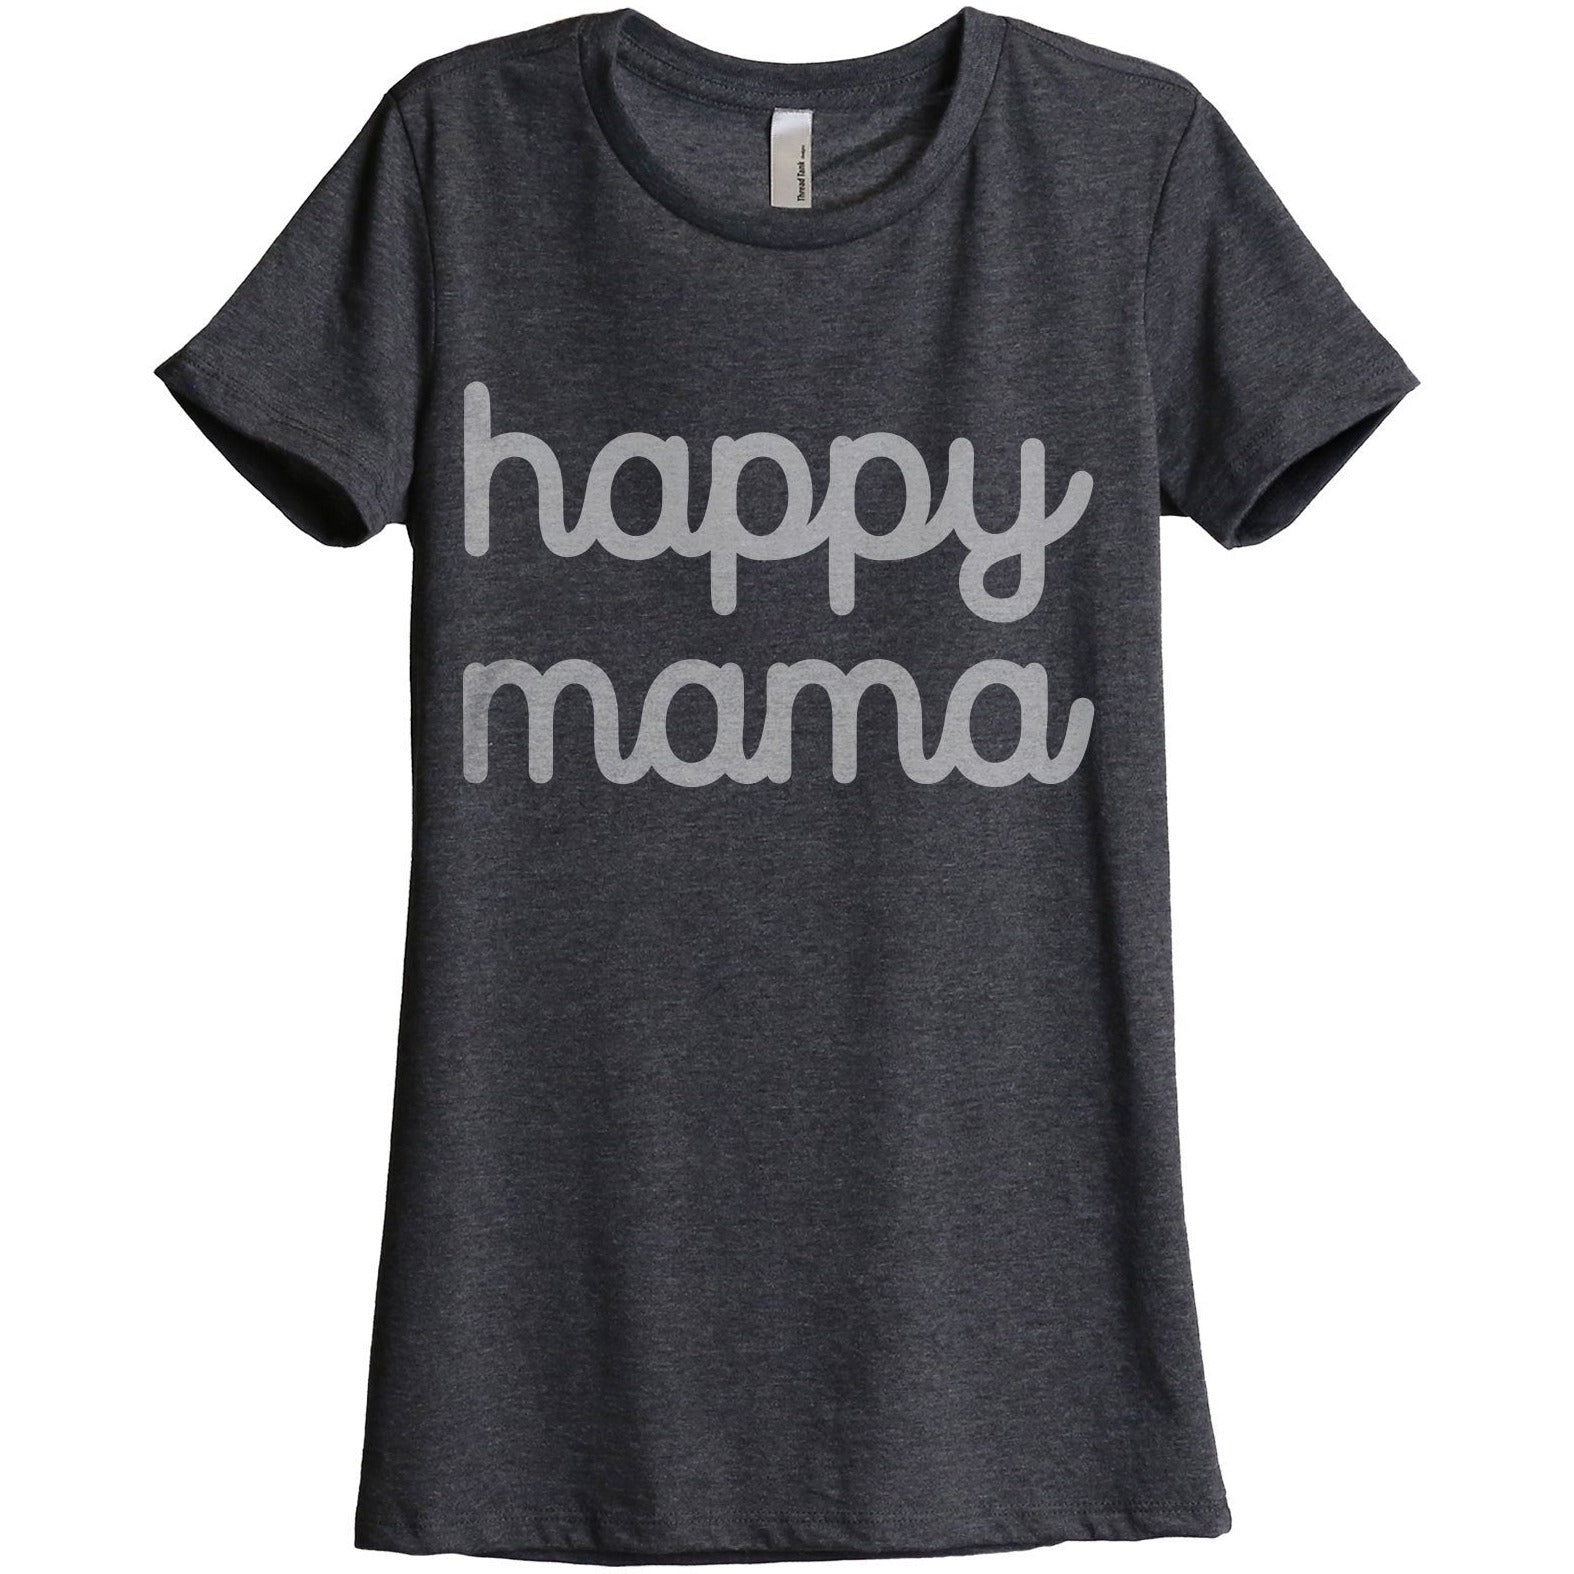 Happy Mama Women's Relaxed Crewneck T-Shirt Top Tee Charcoal Grey
